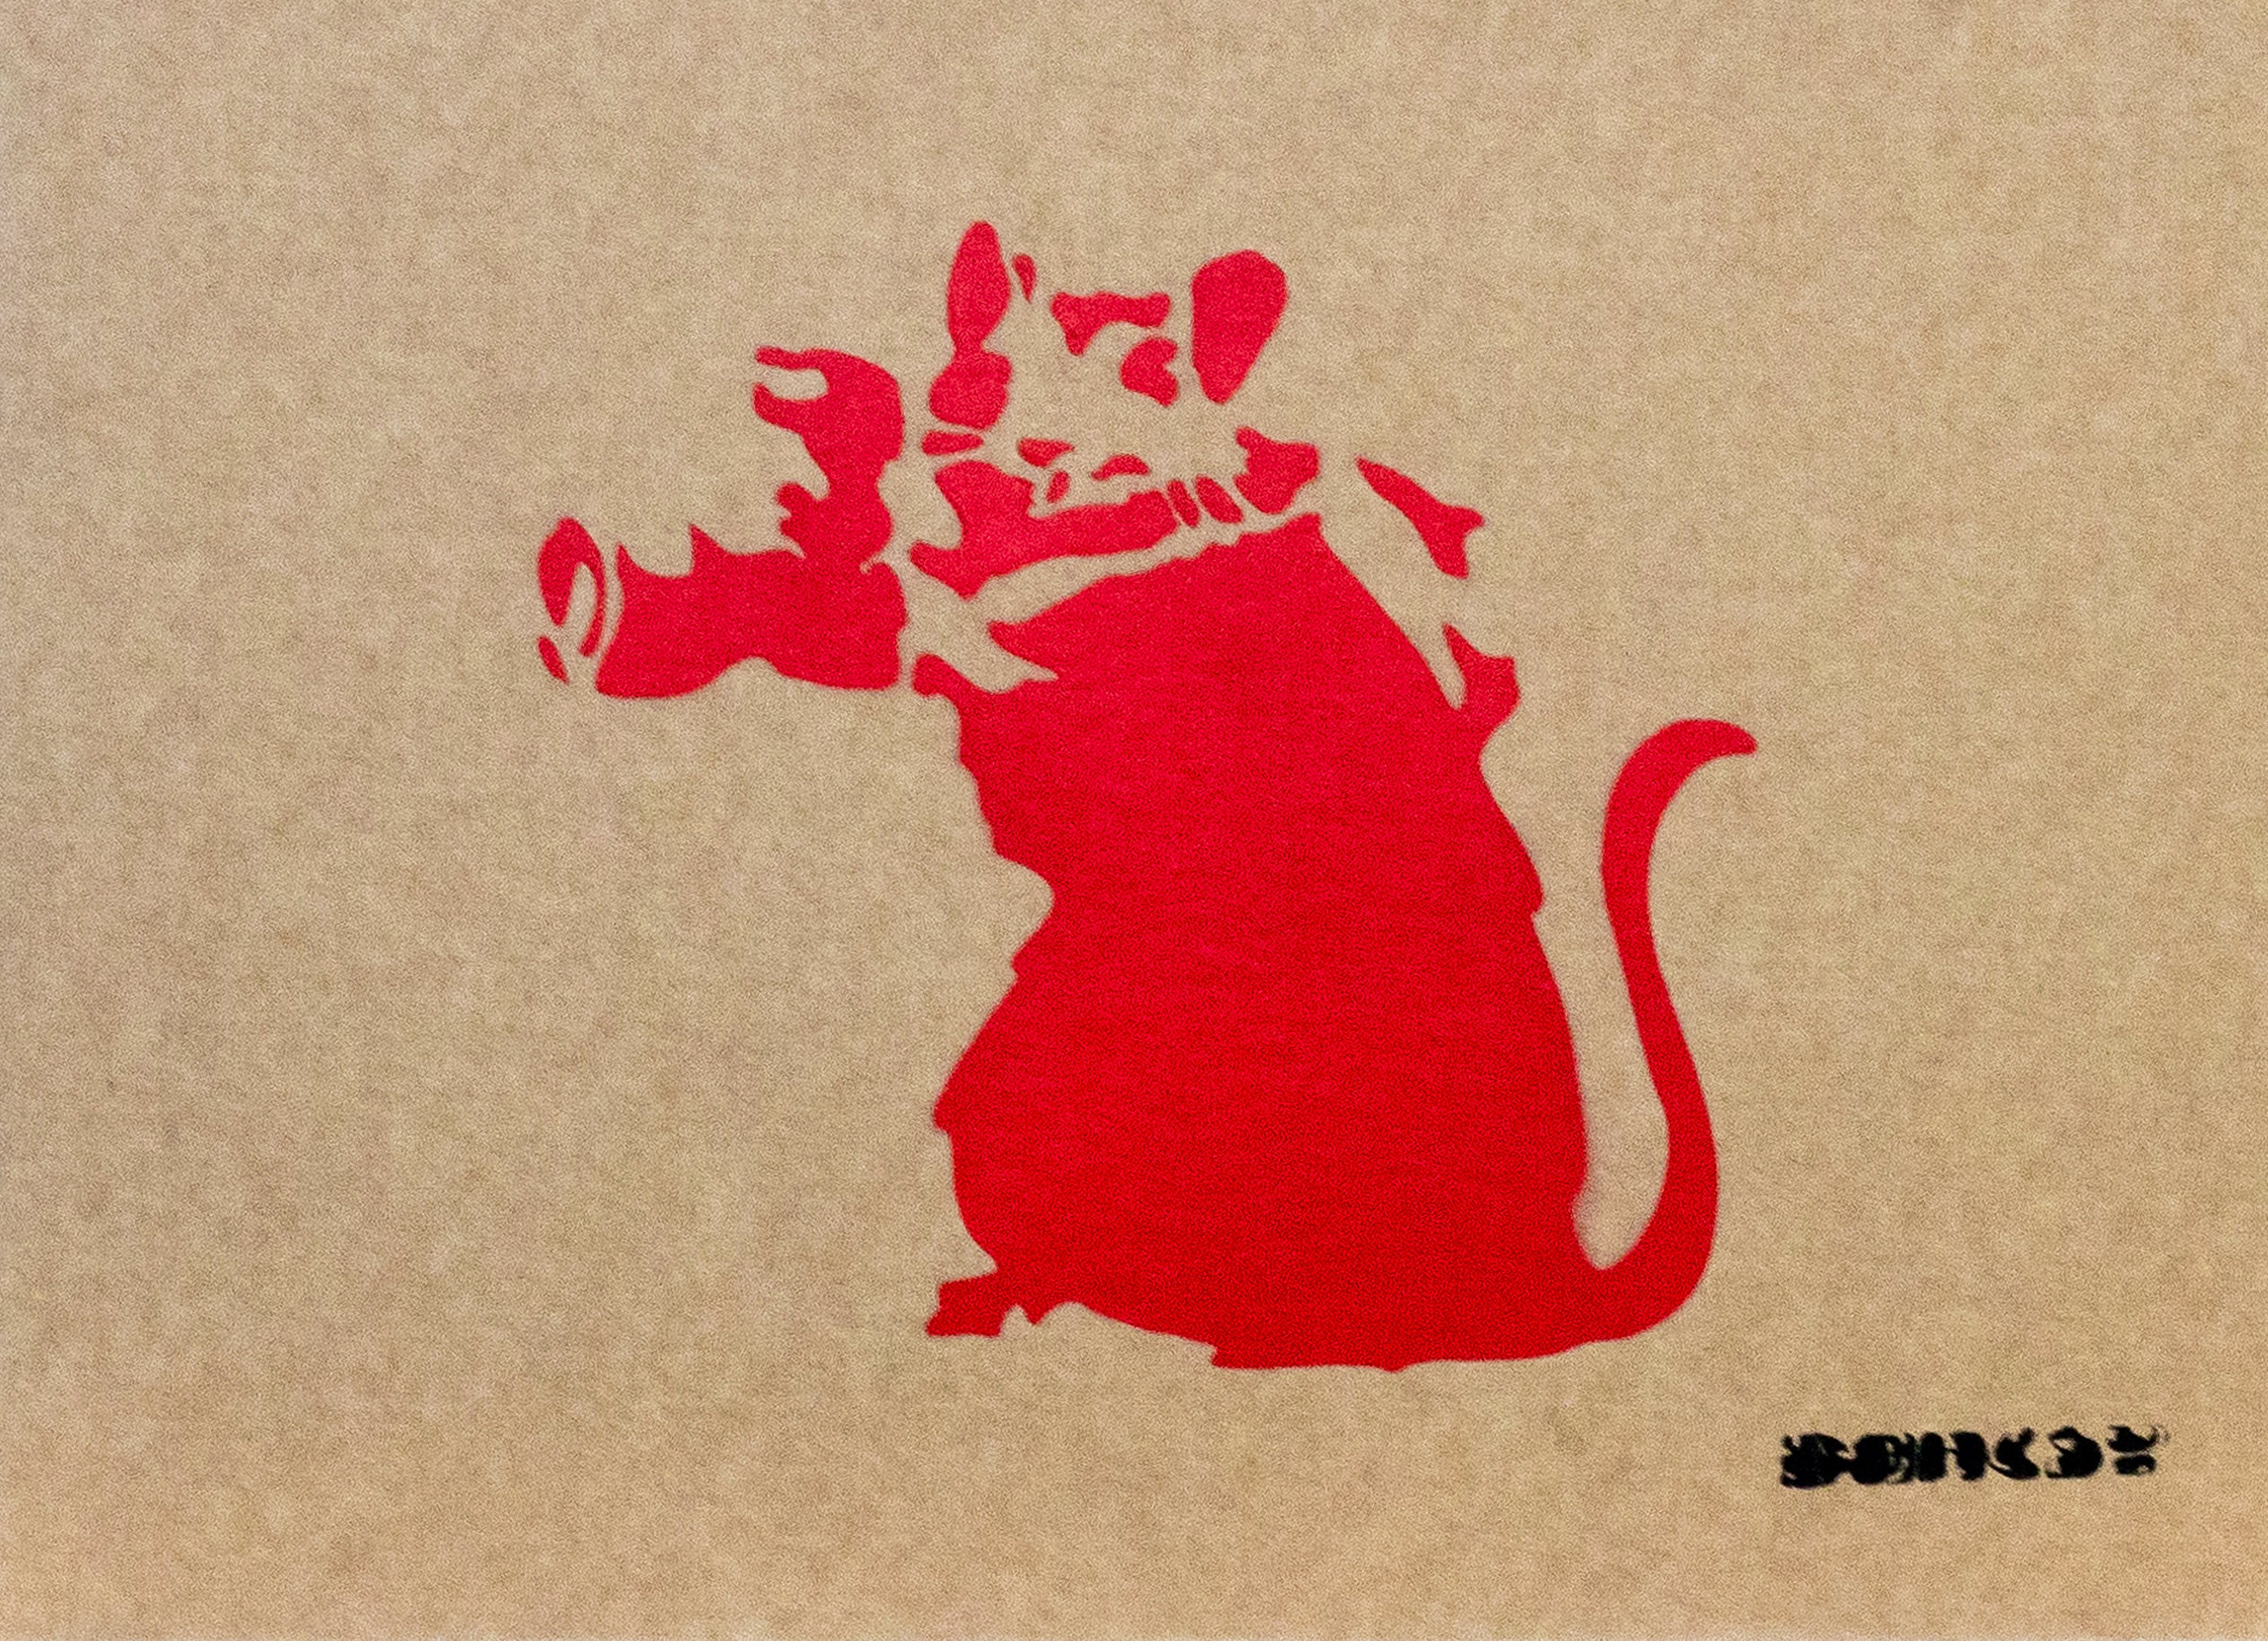 Banksy  Spray paint and stencil on cardboard, signed and numbered